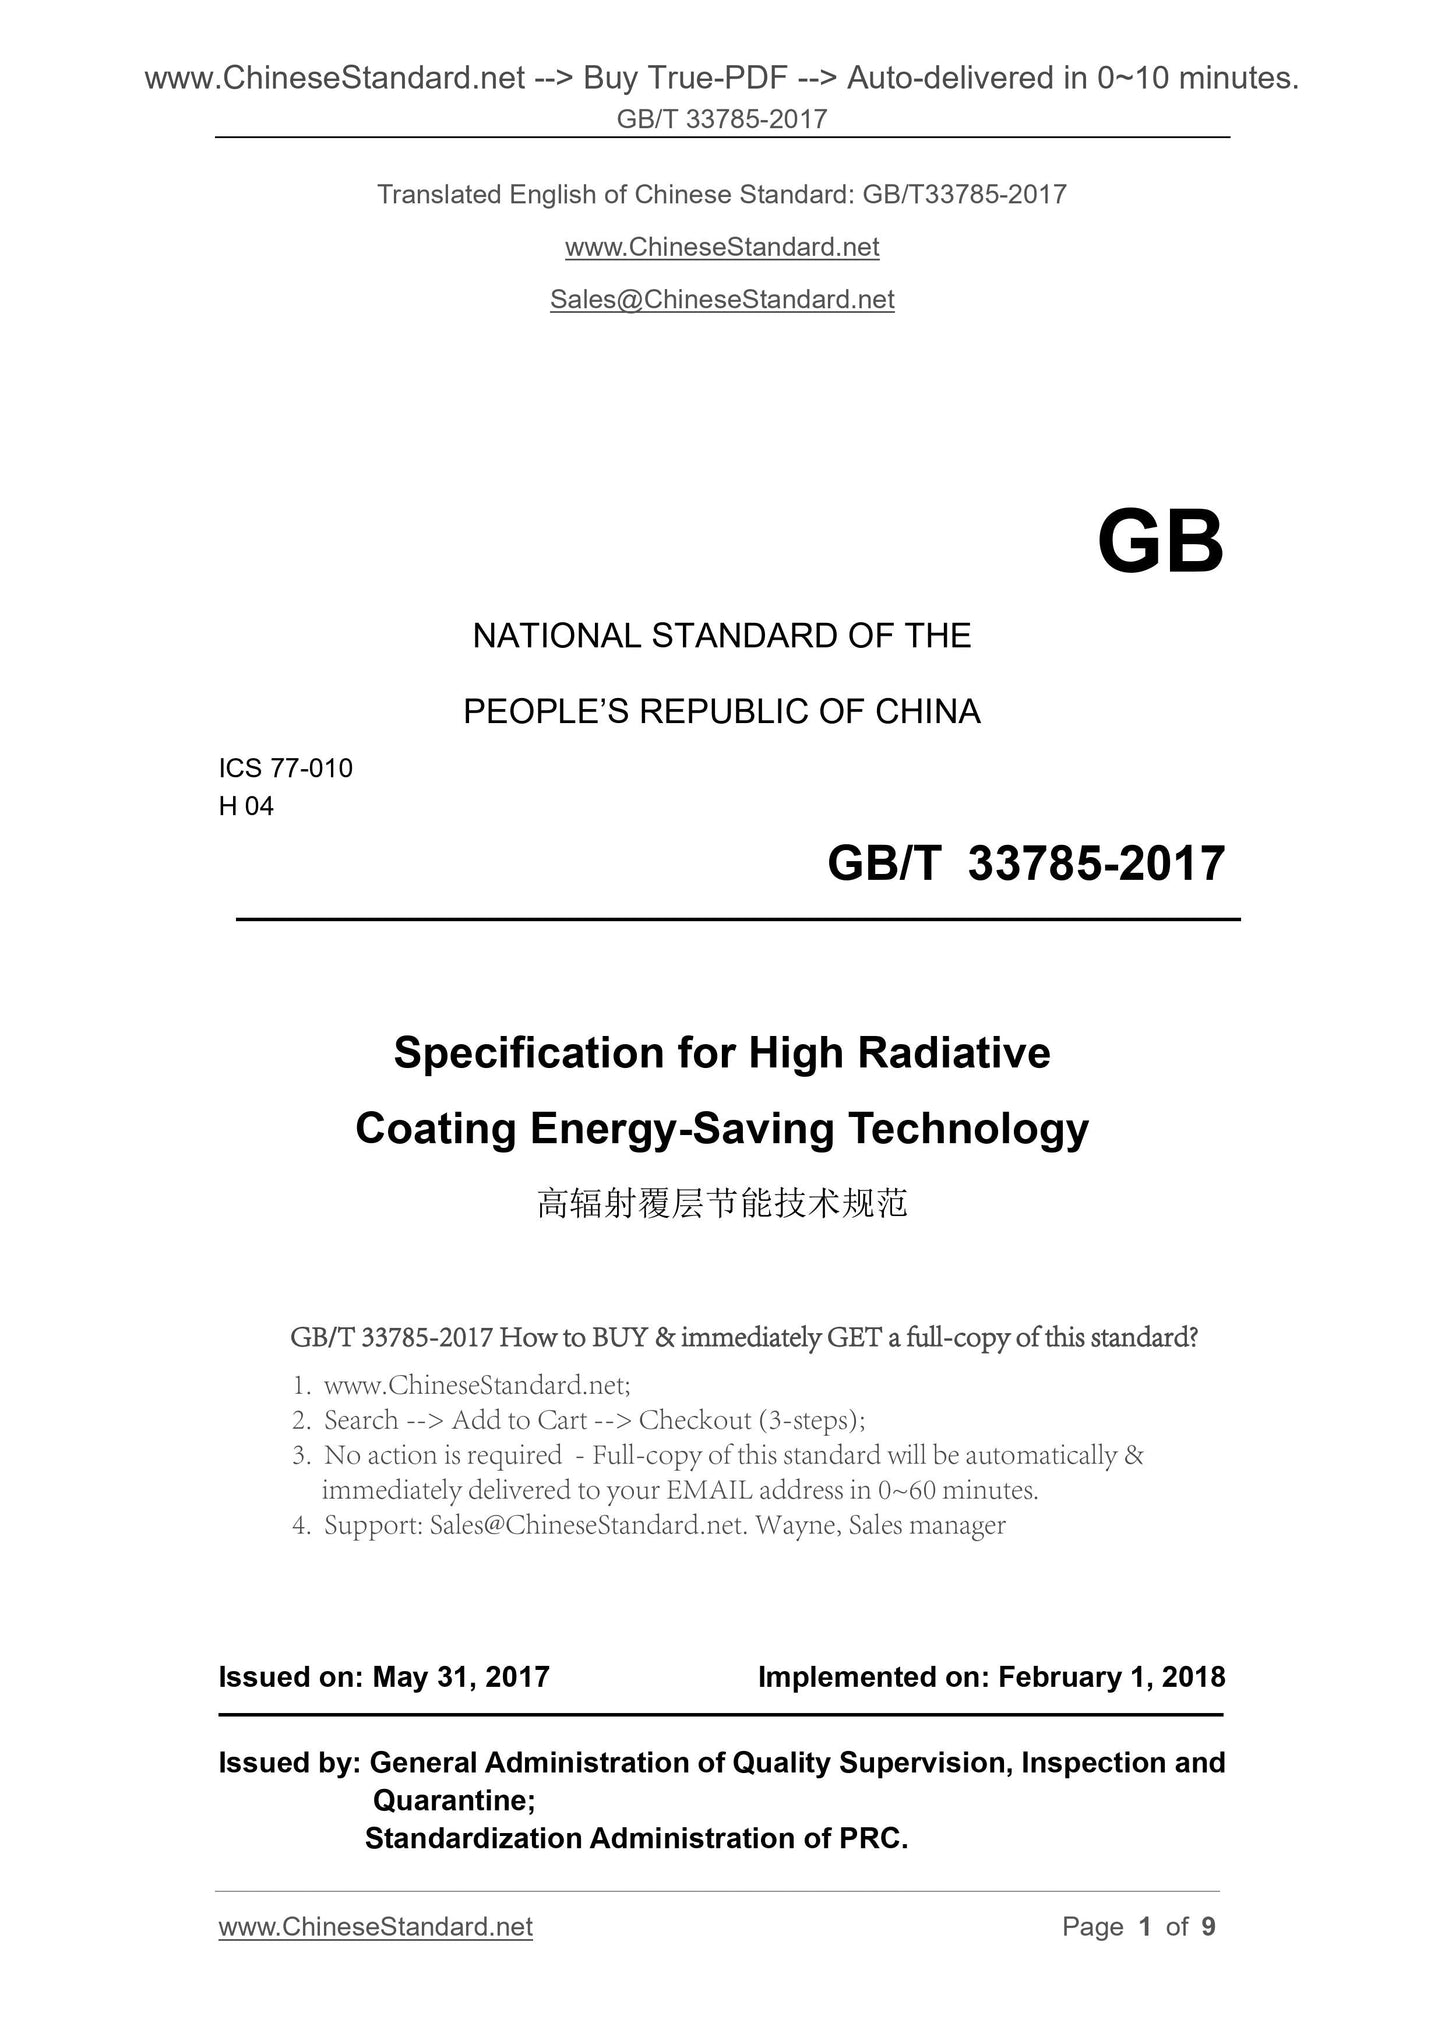 GB/T 33785-2017 Page 1